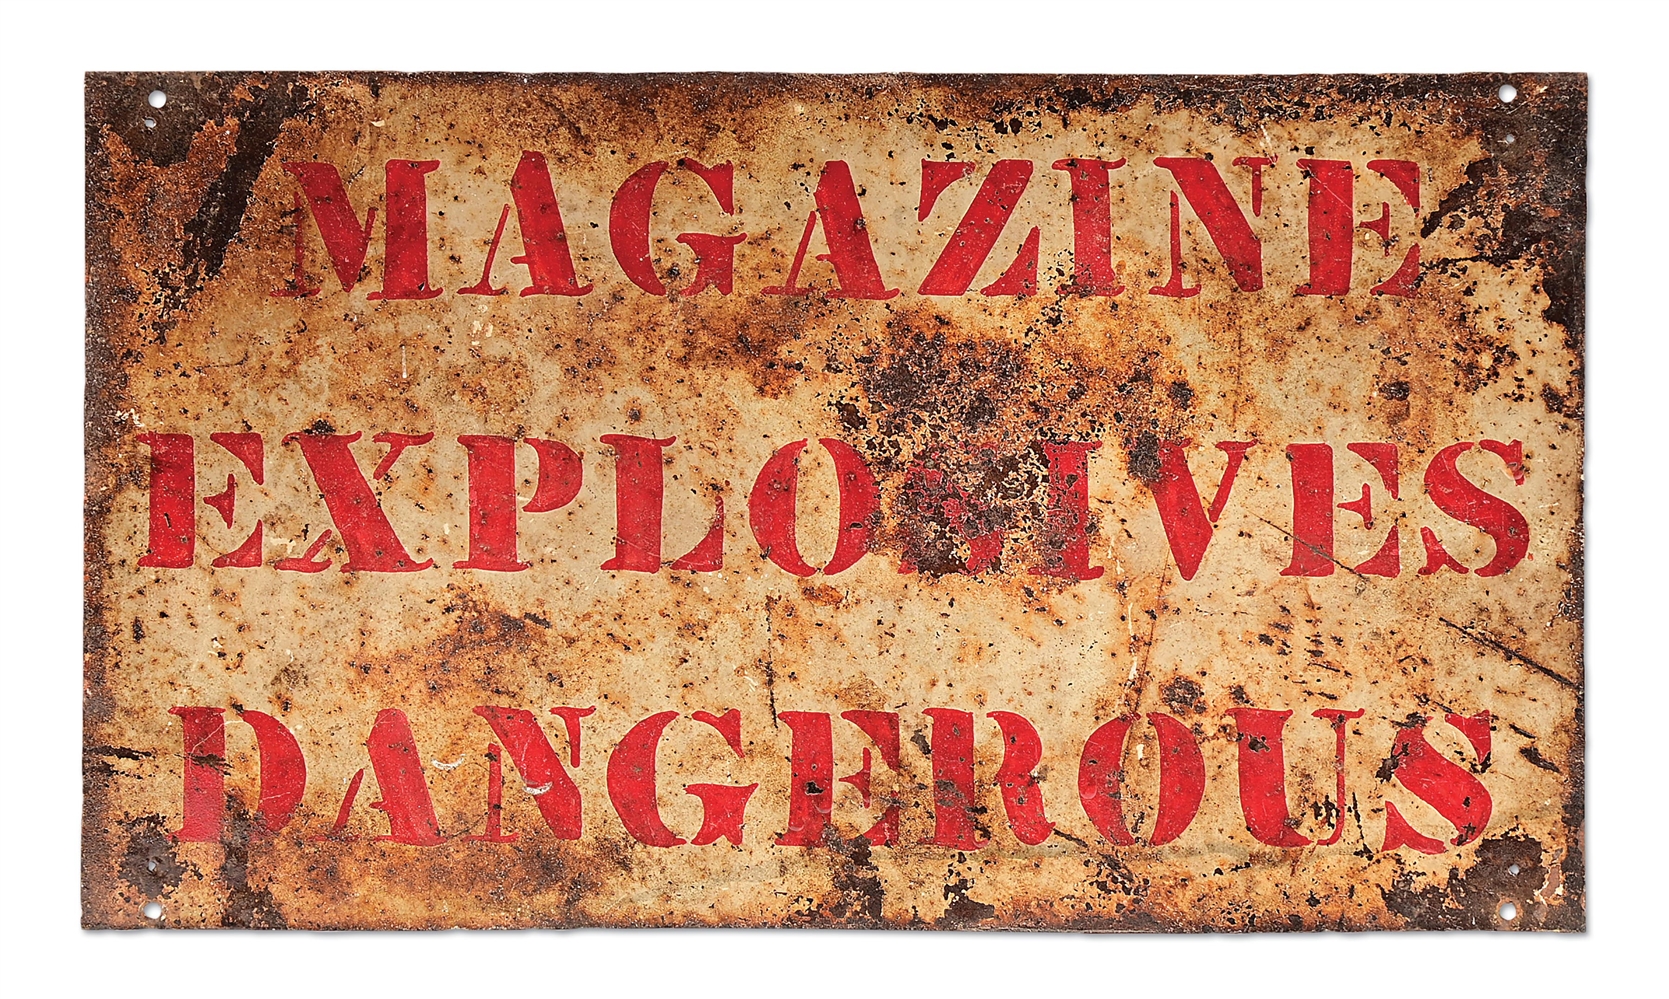 EARLY MAGAZINE EXPLOSIVES SIGN.